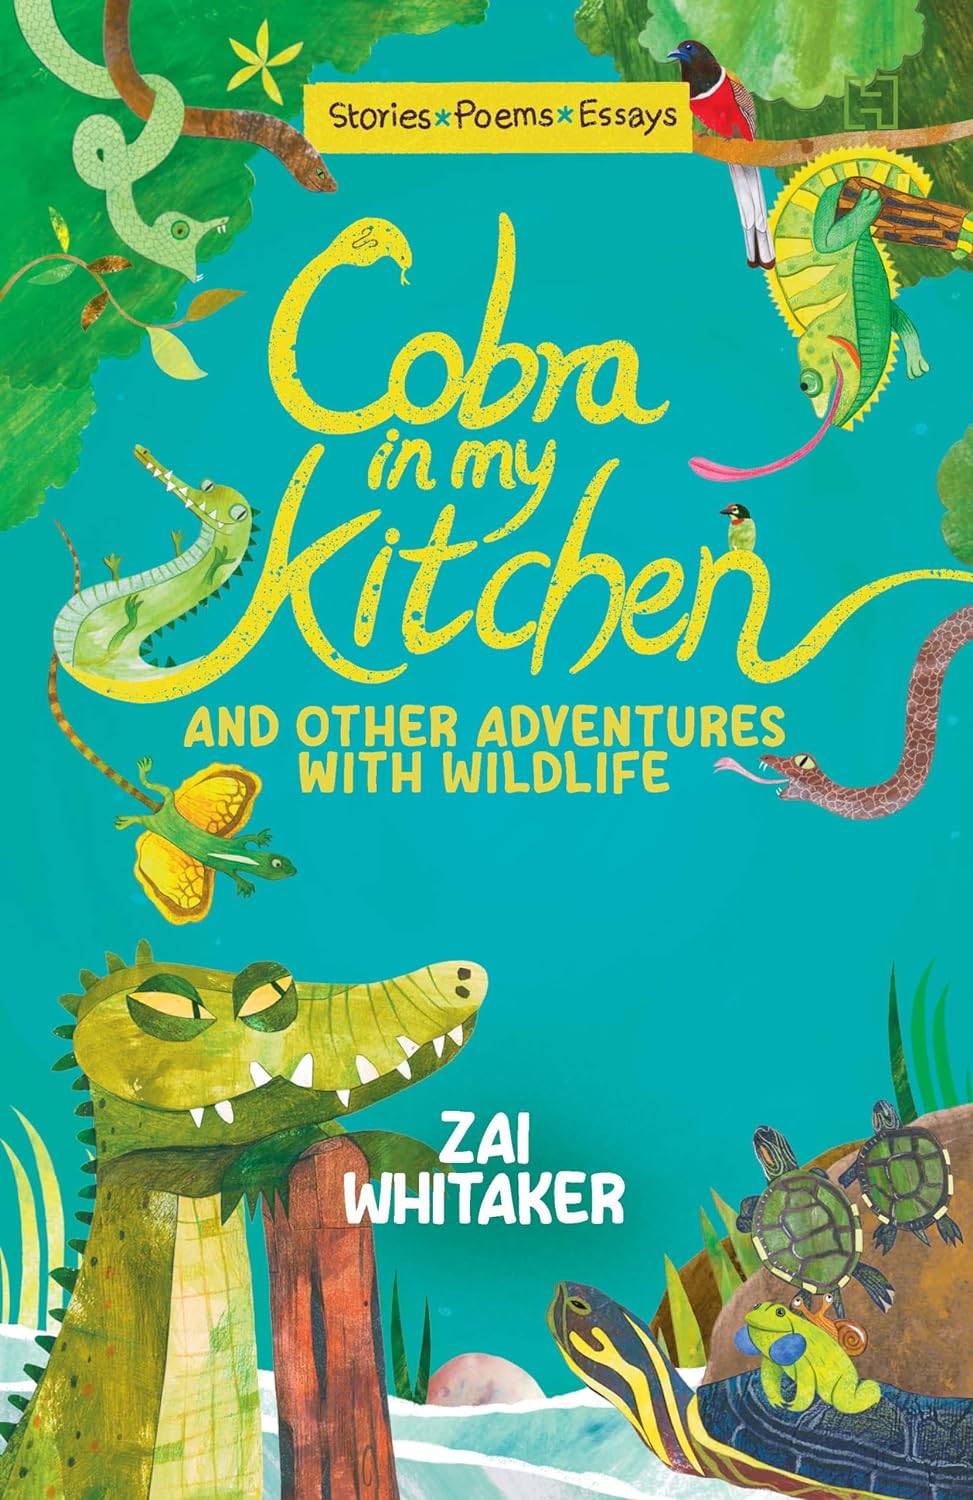 Cobra In My Kitchen And Other Adventures With Wildlife - Paperback